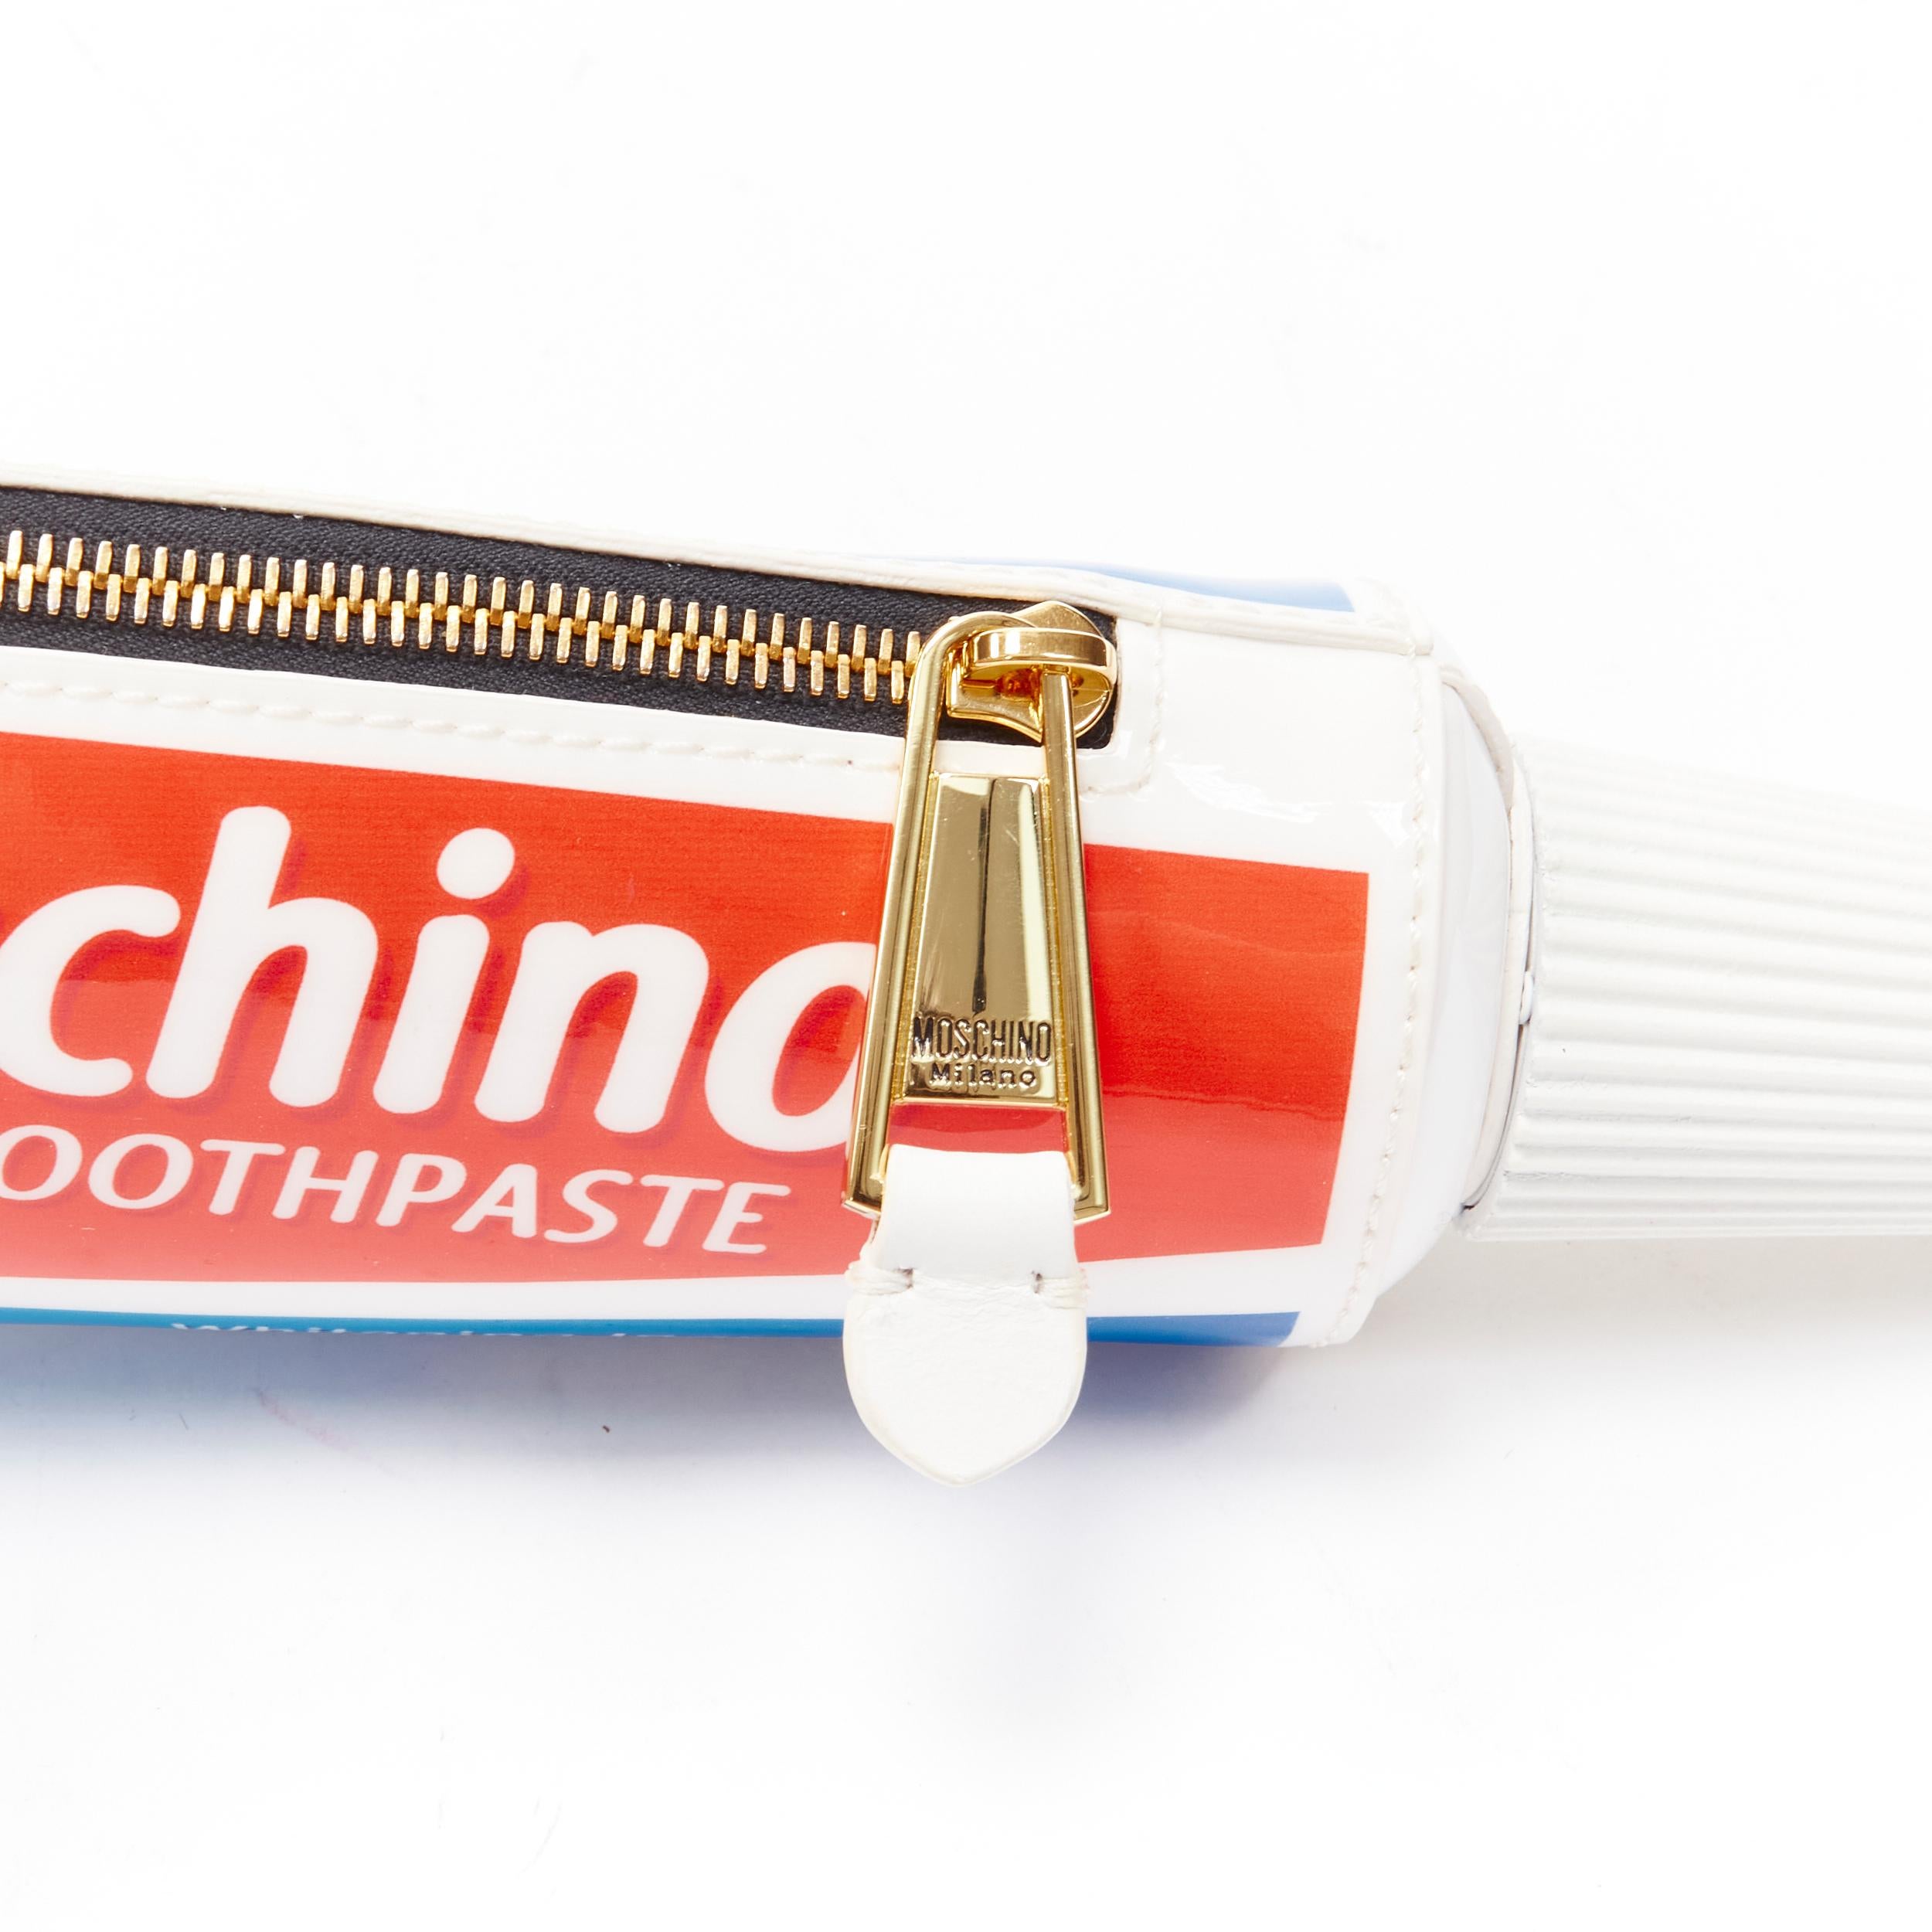 Beige rare MOSCHINO Couture! 2019 Runway Toothpaste tube XL zip back clutch bag